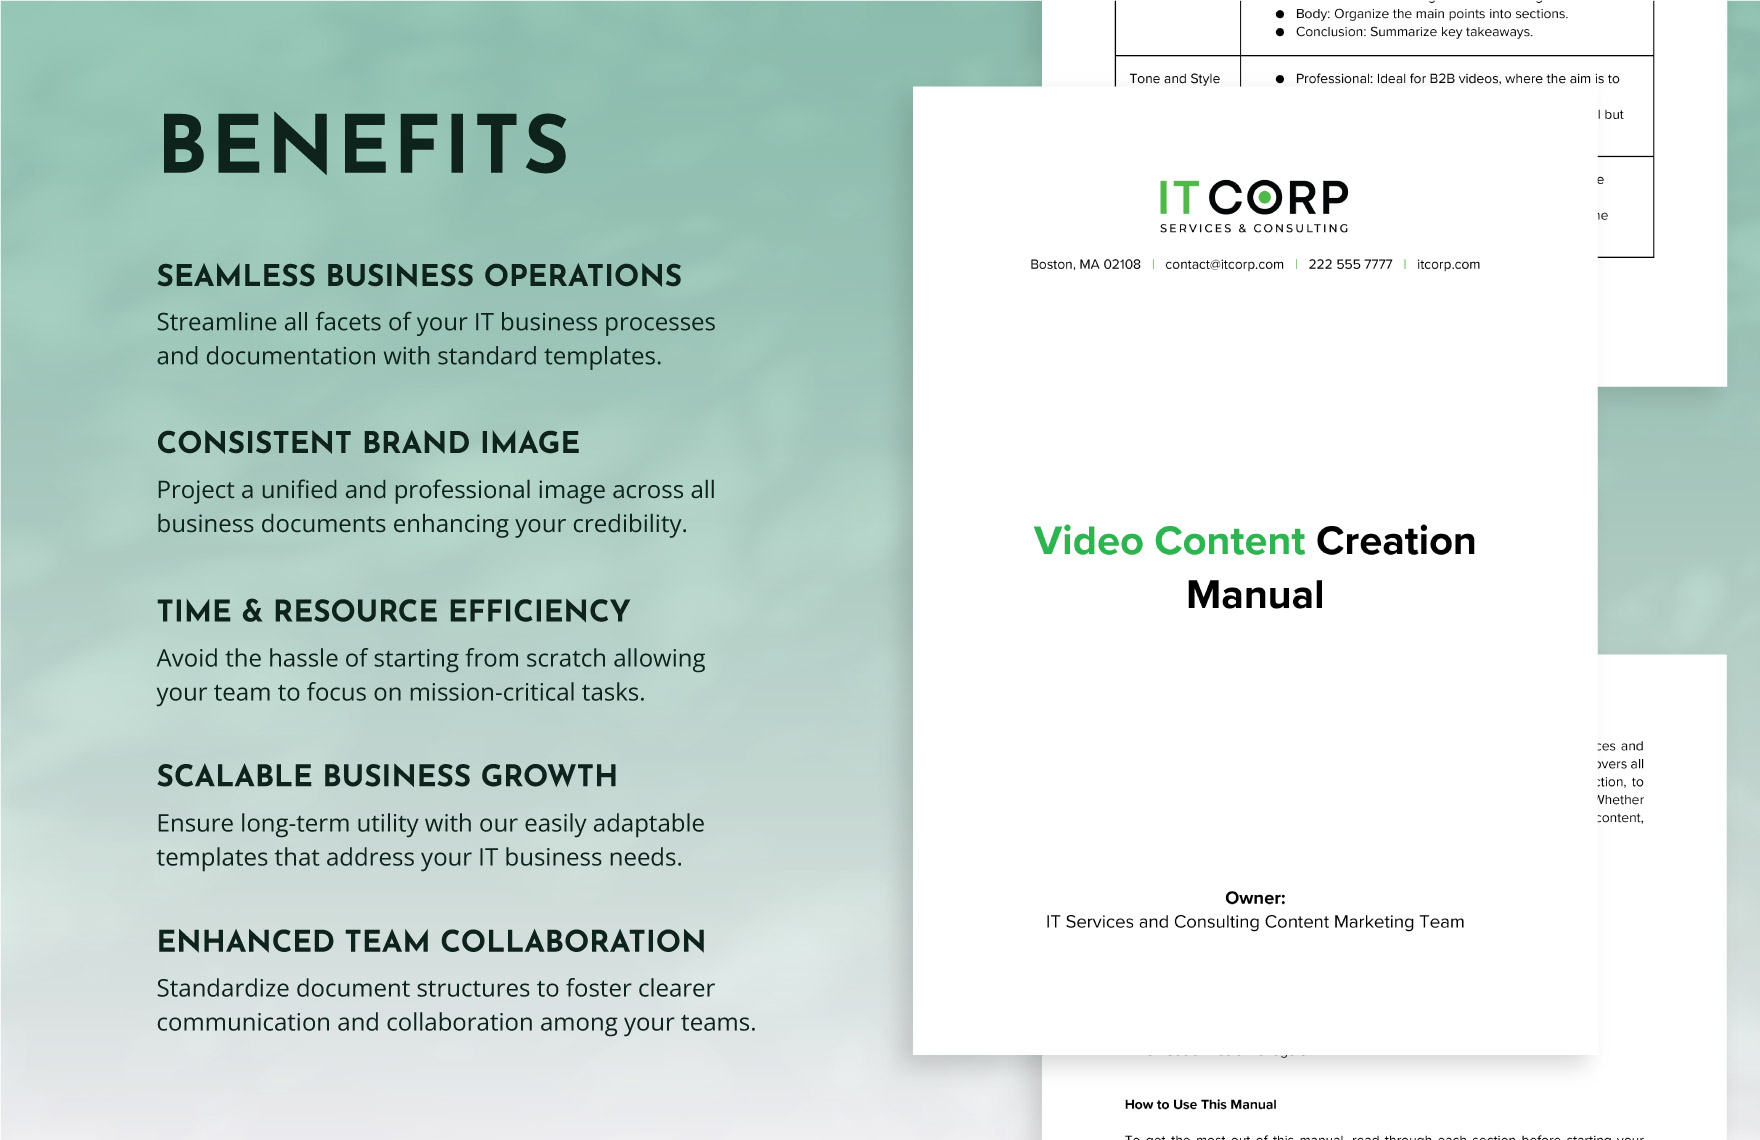 Video Content Creation Manual Template